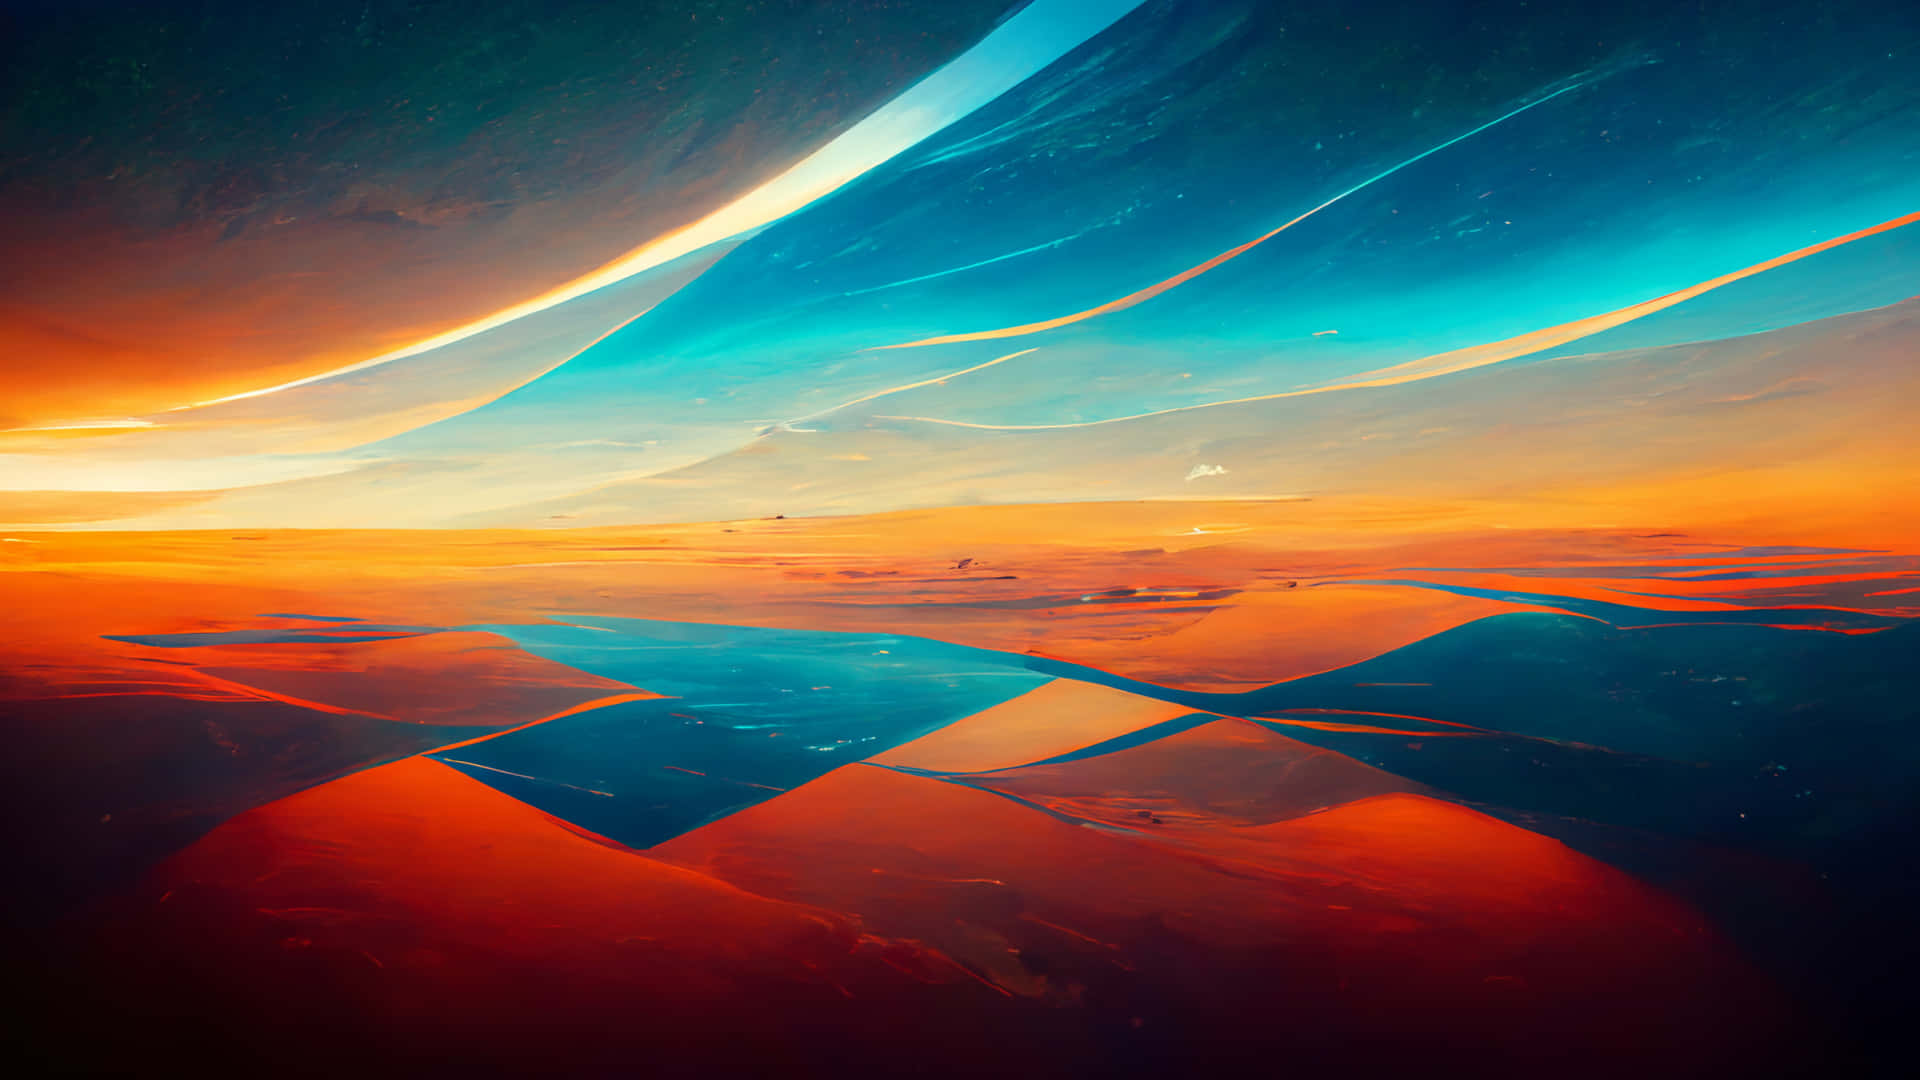 A Painting Of A Desert With A Blue Sky And Orange Clouds Wallpaper